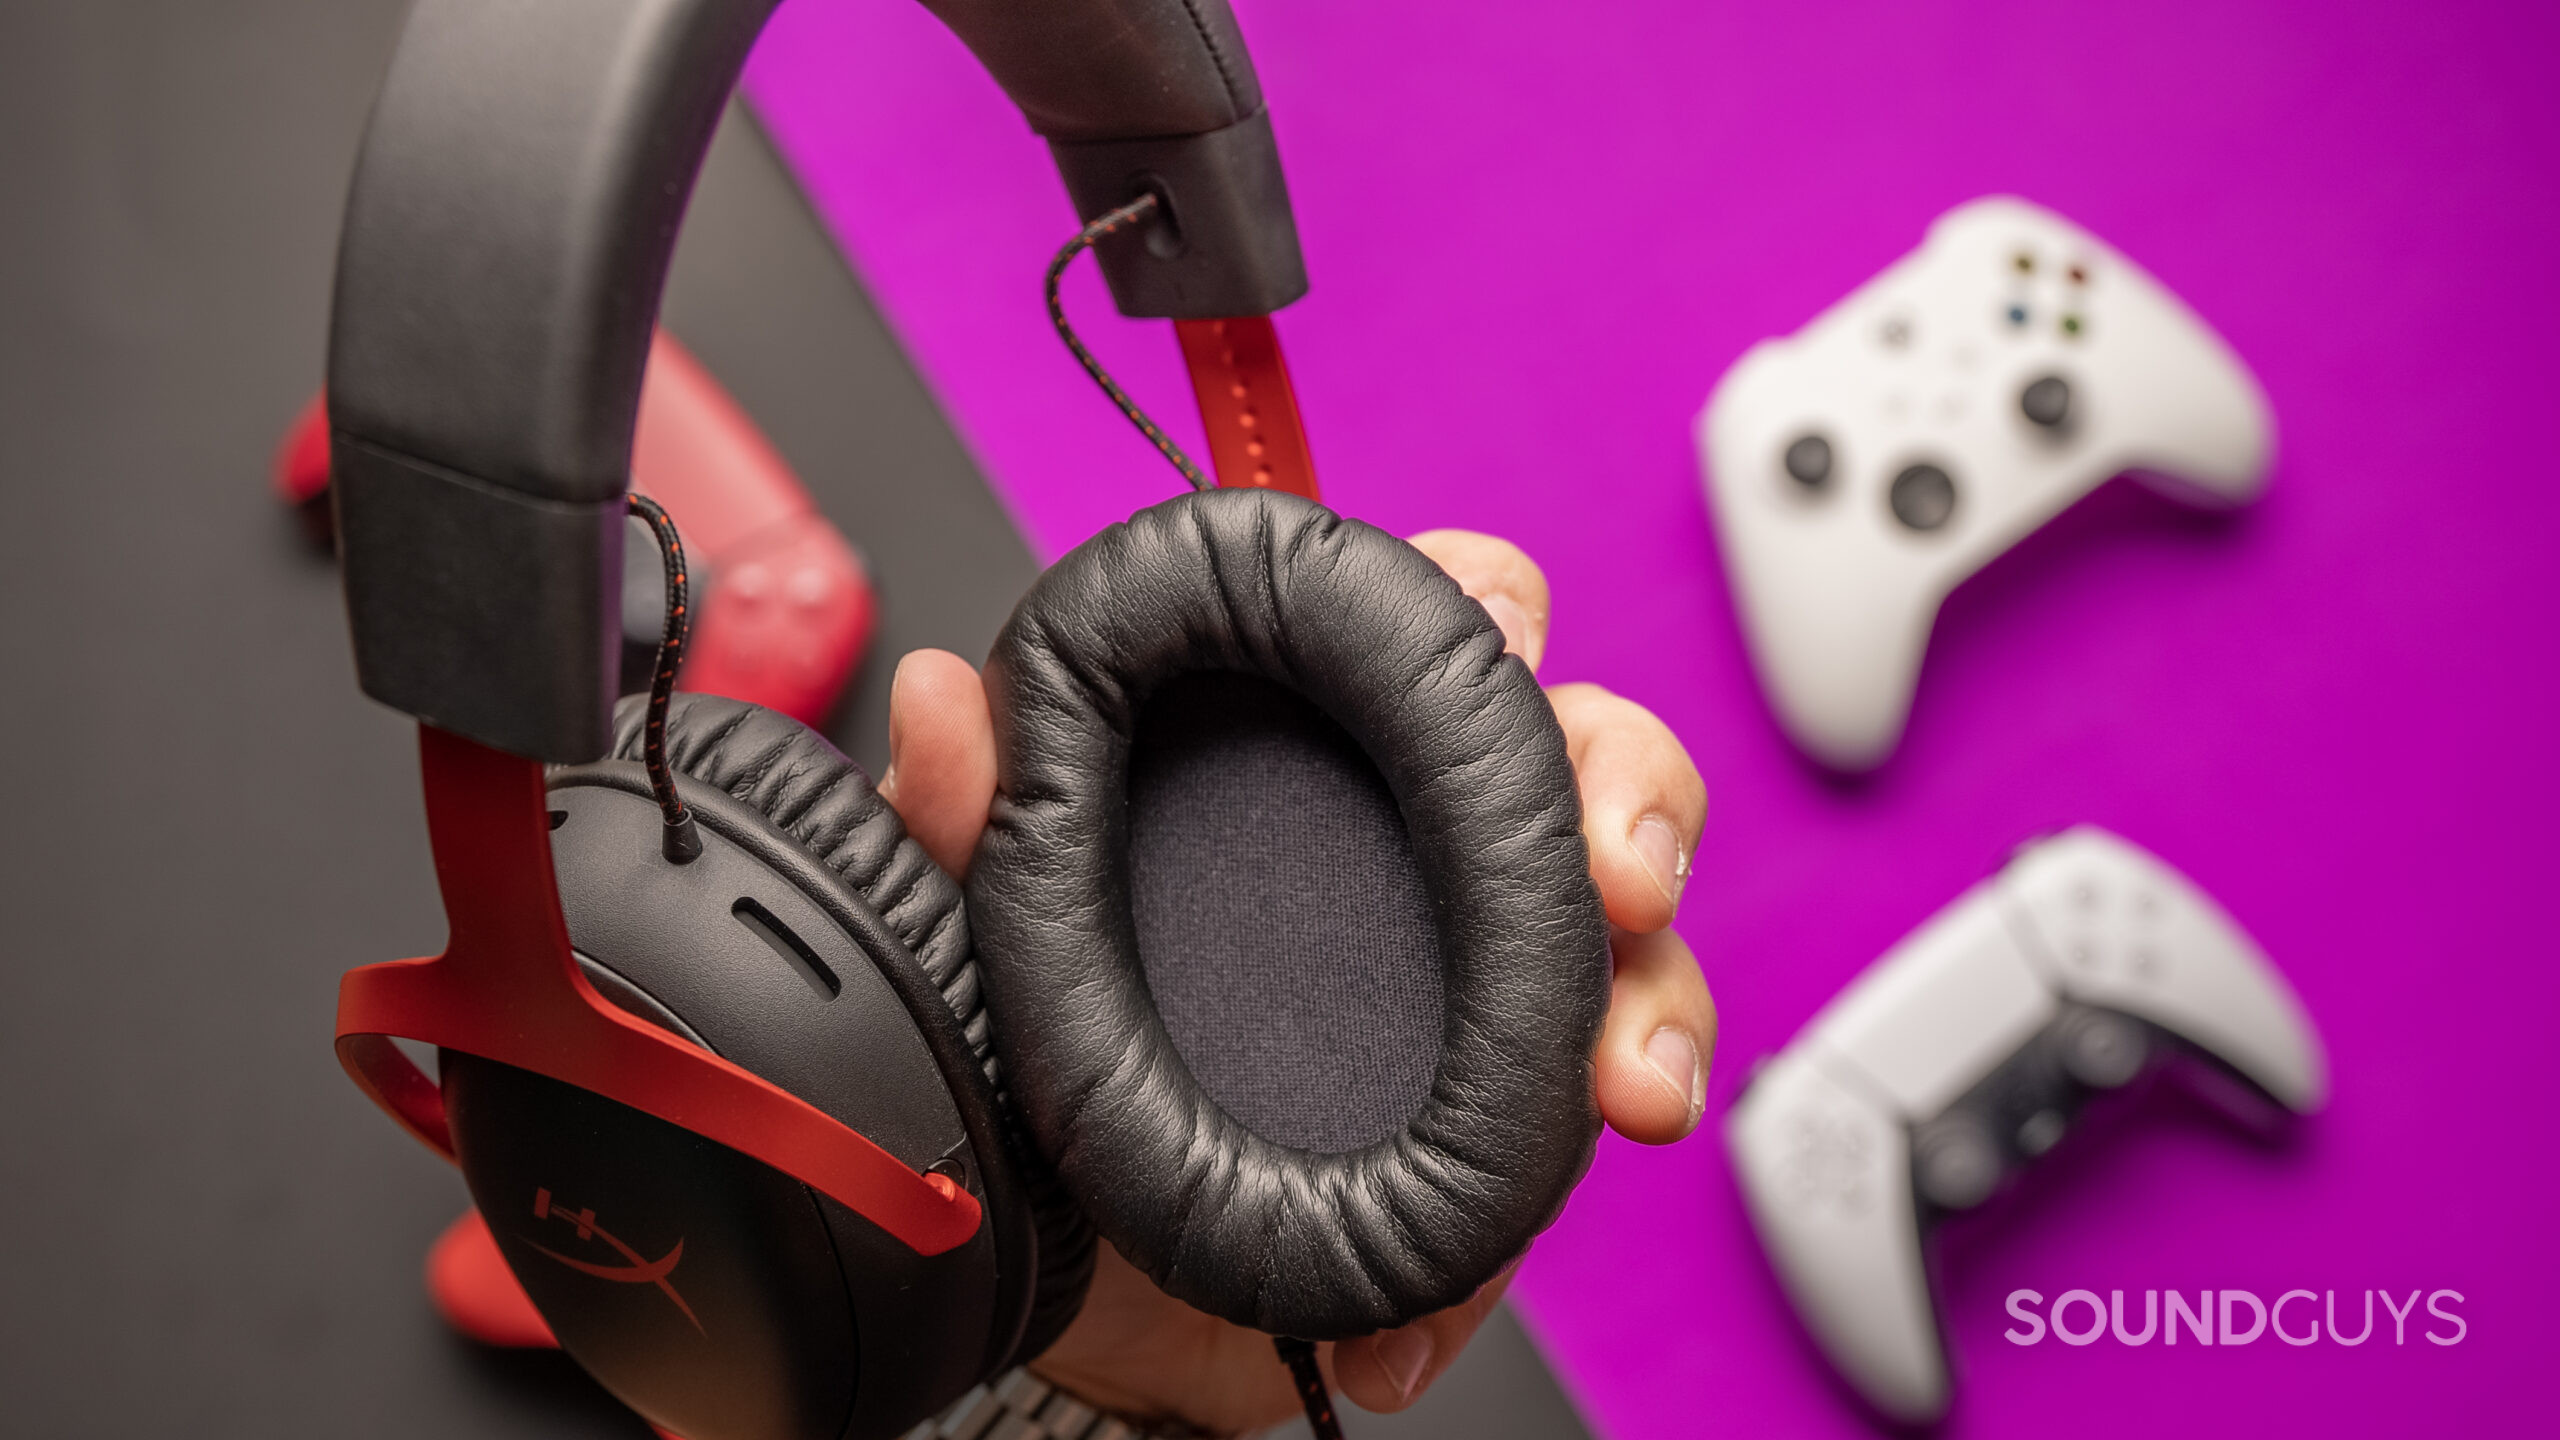 The HyperX Cloud III Wireless price just got slashed to $134.99